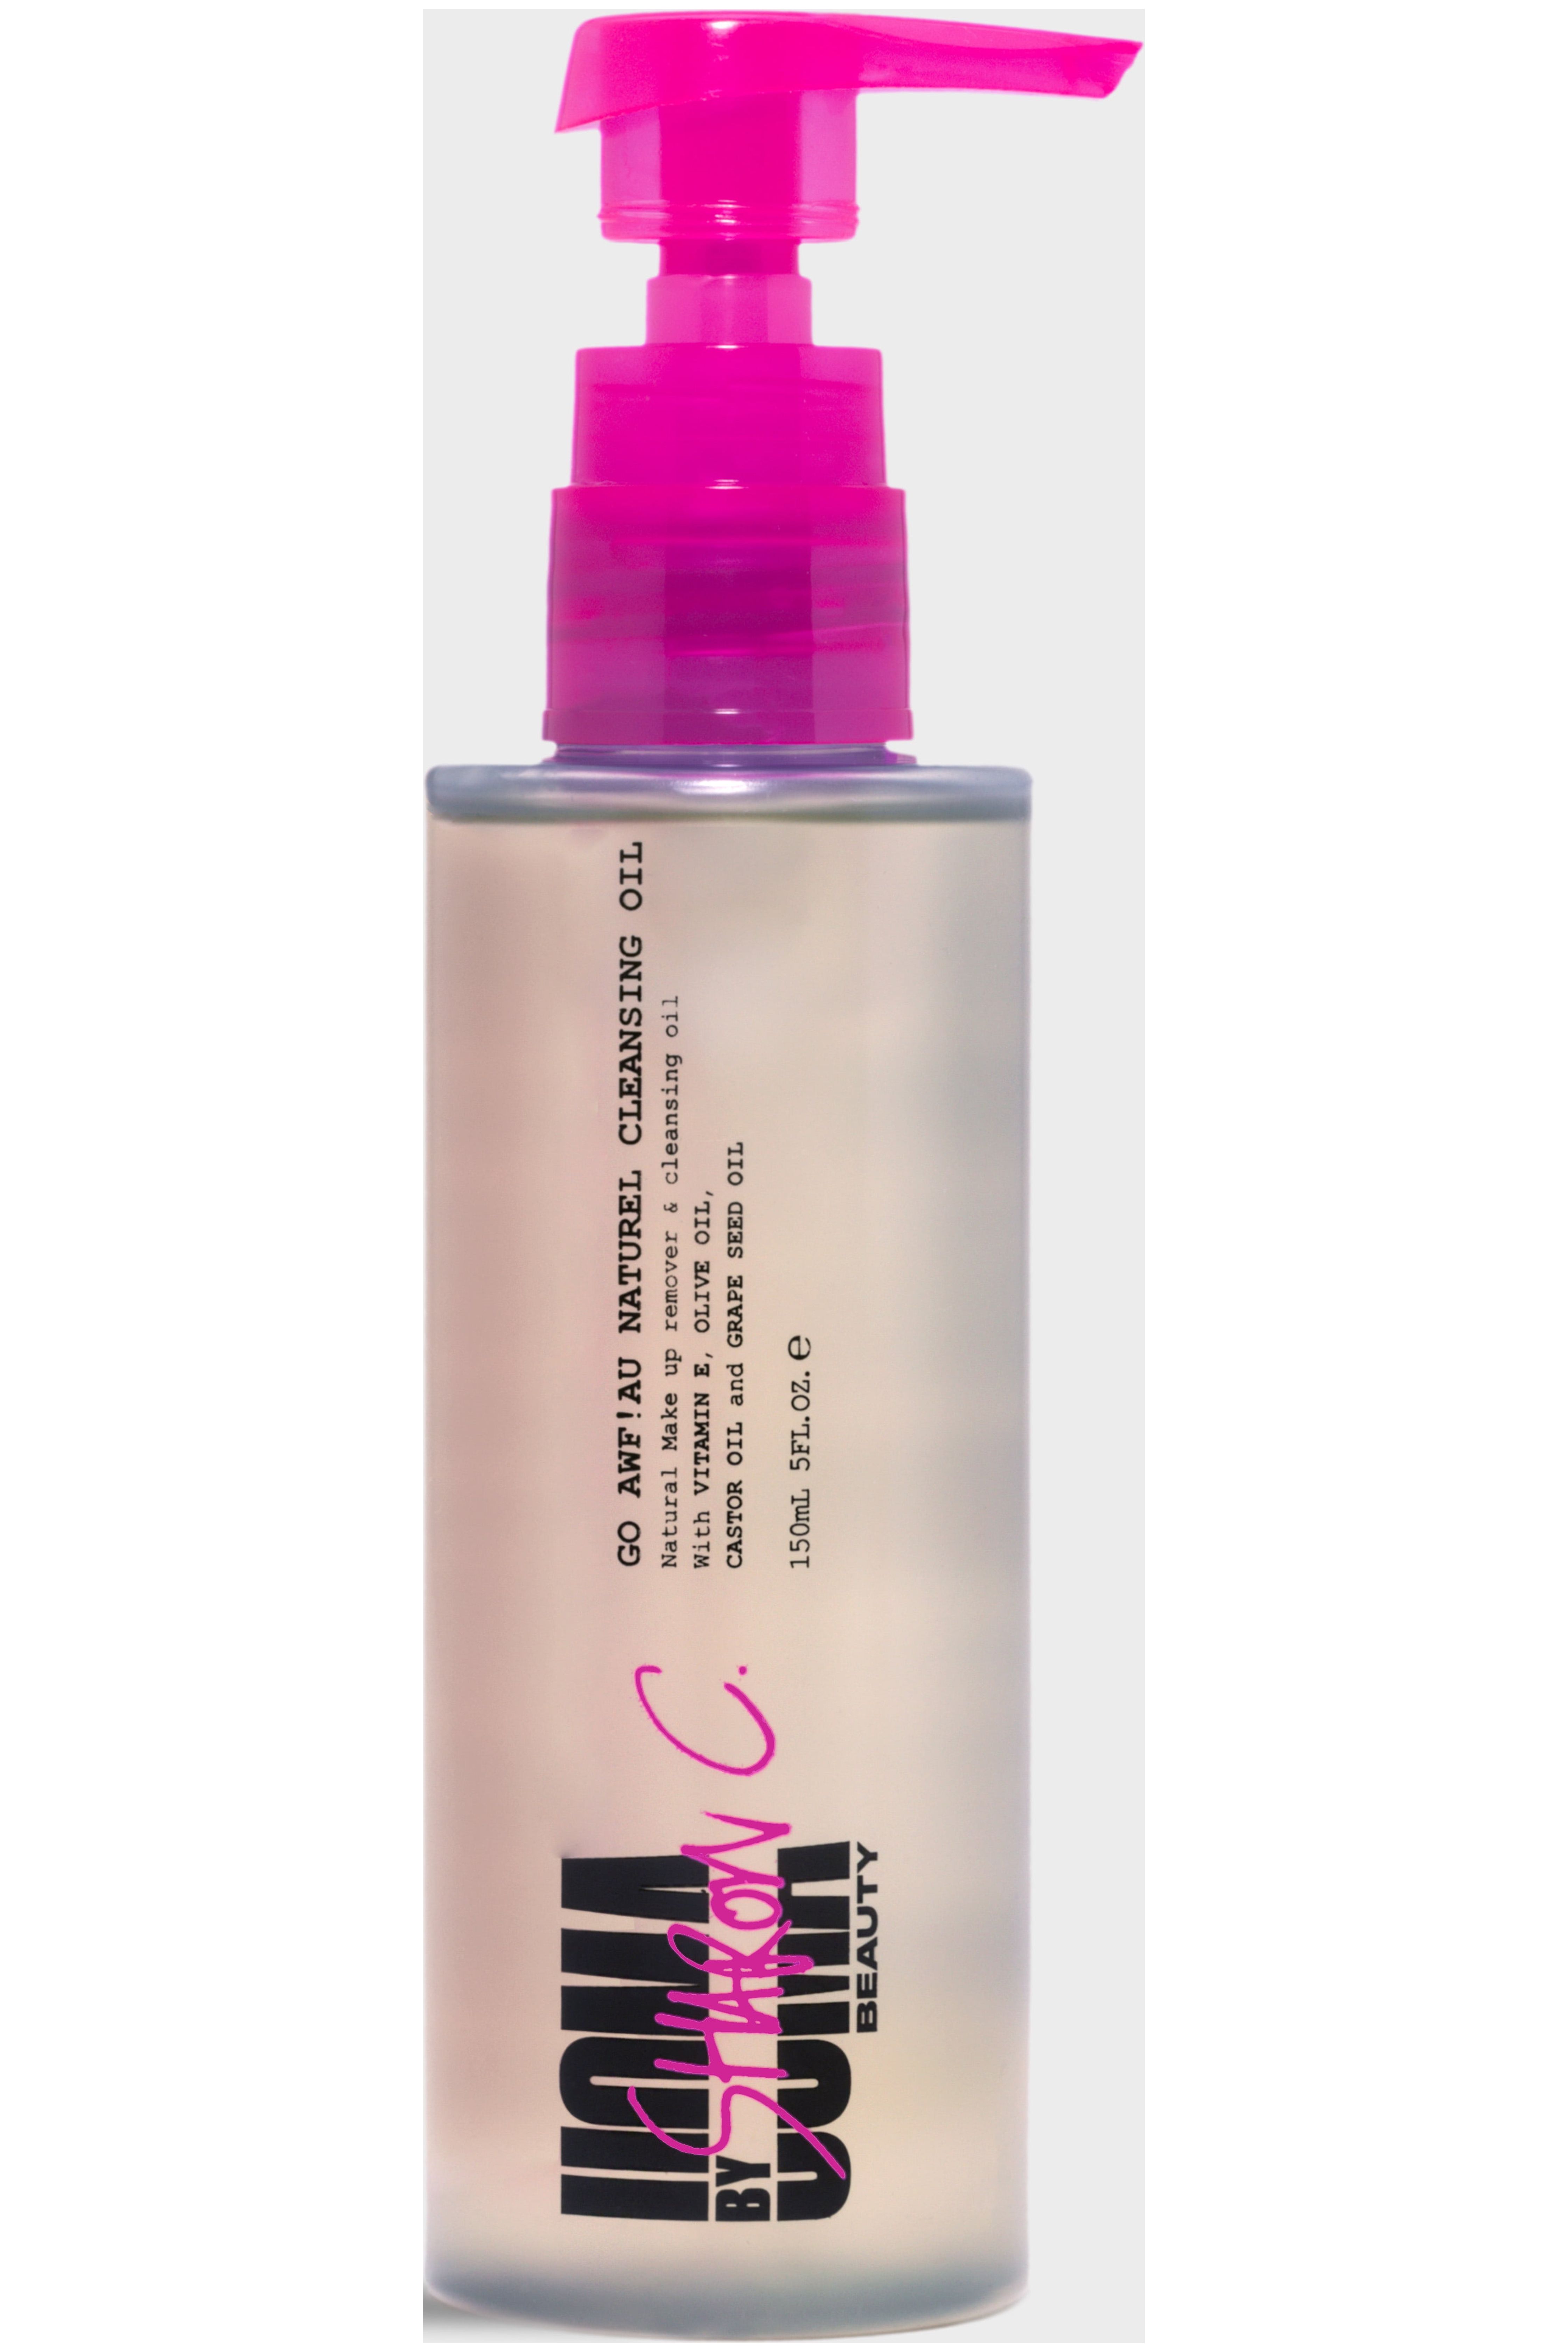 Uoma By Sharon C, Go Awl! Au Naturel Cleansing Oil - image 1 of 4